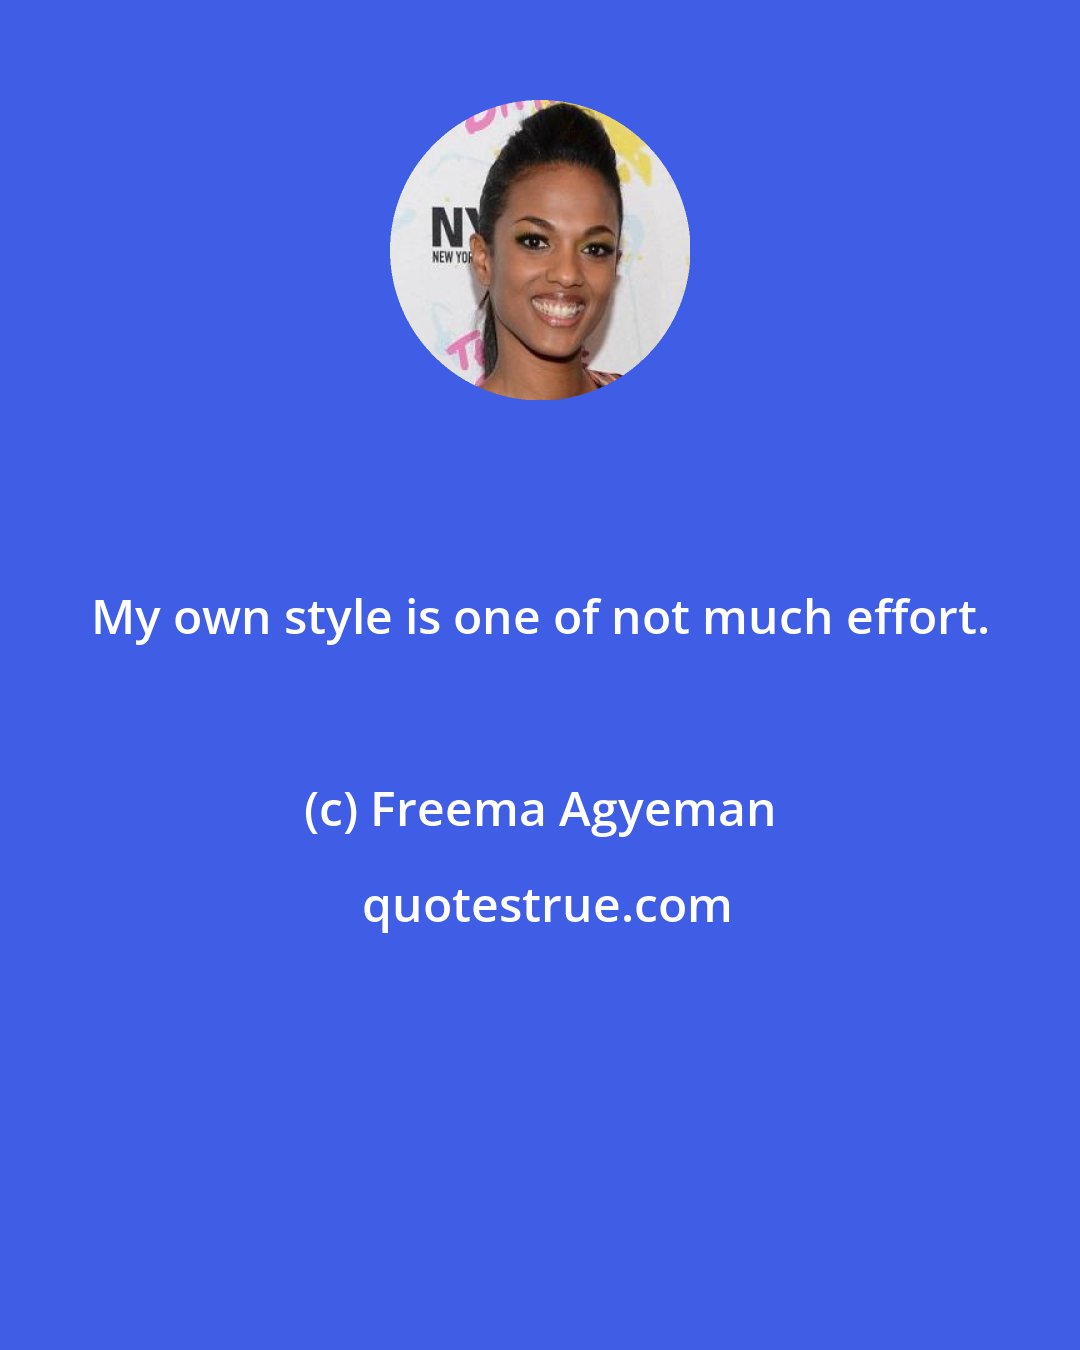 Freema Agyeman: My own style is one of not much effort.